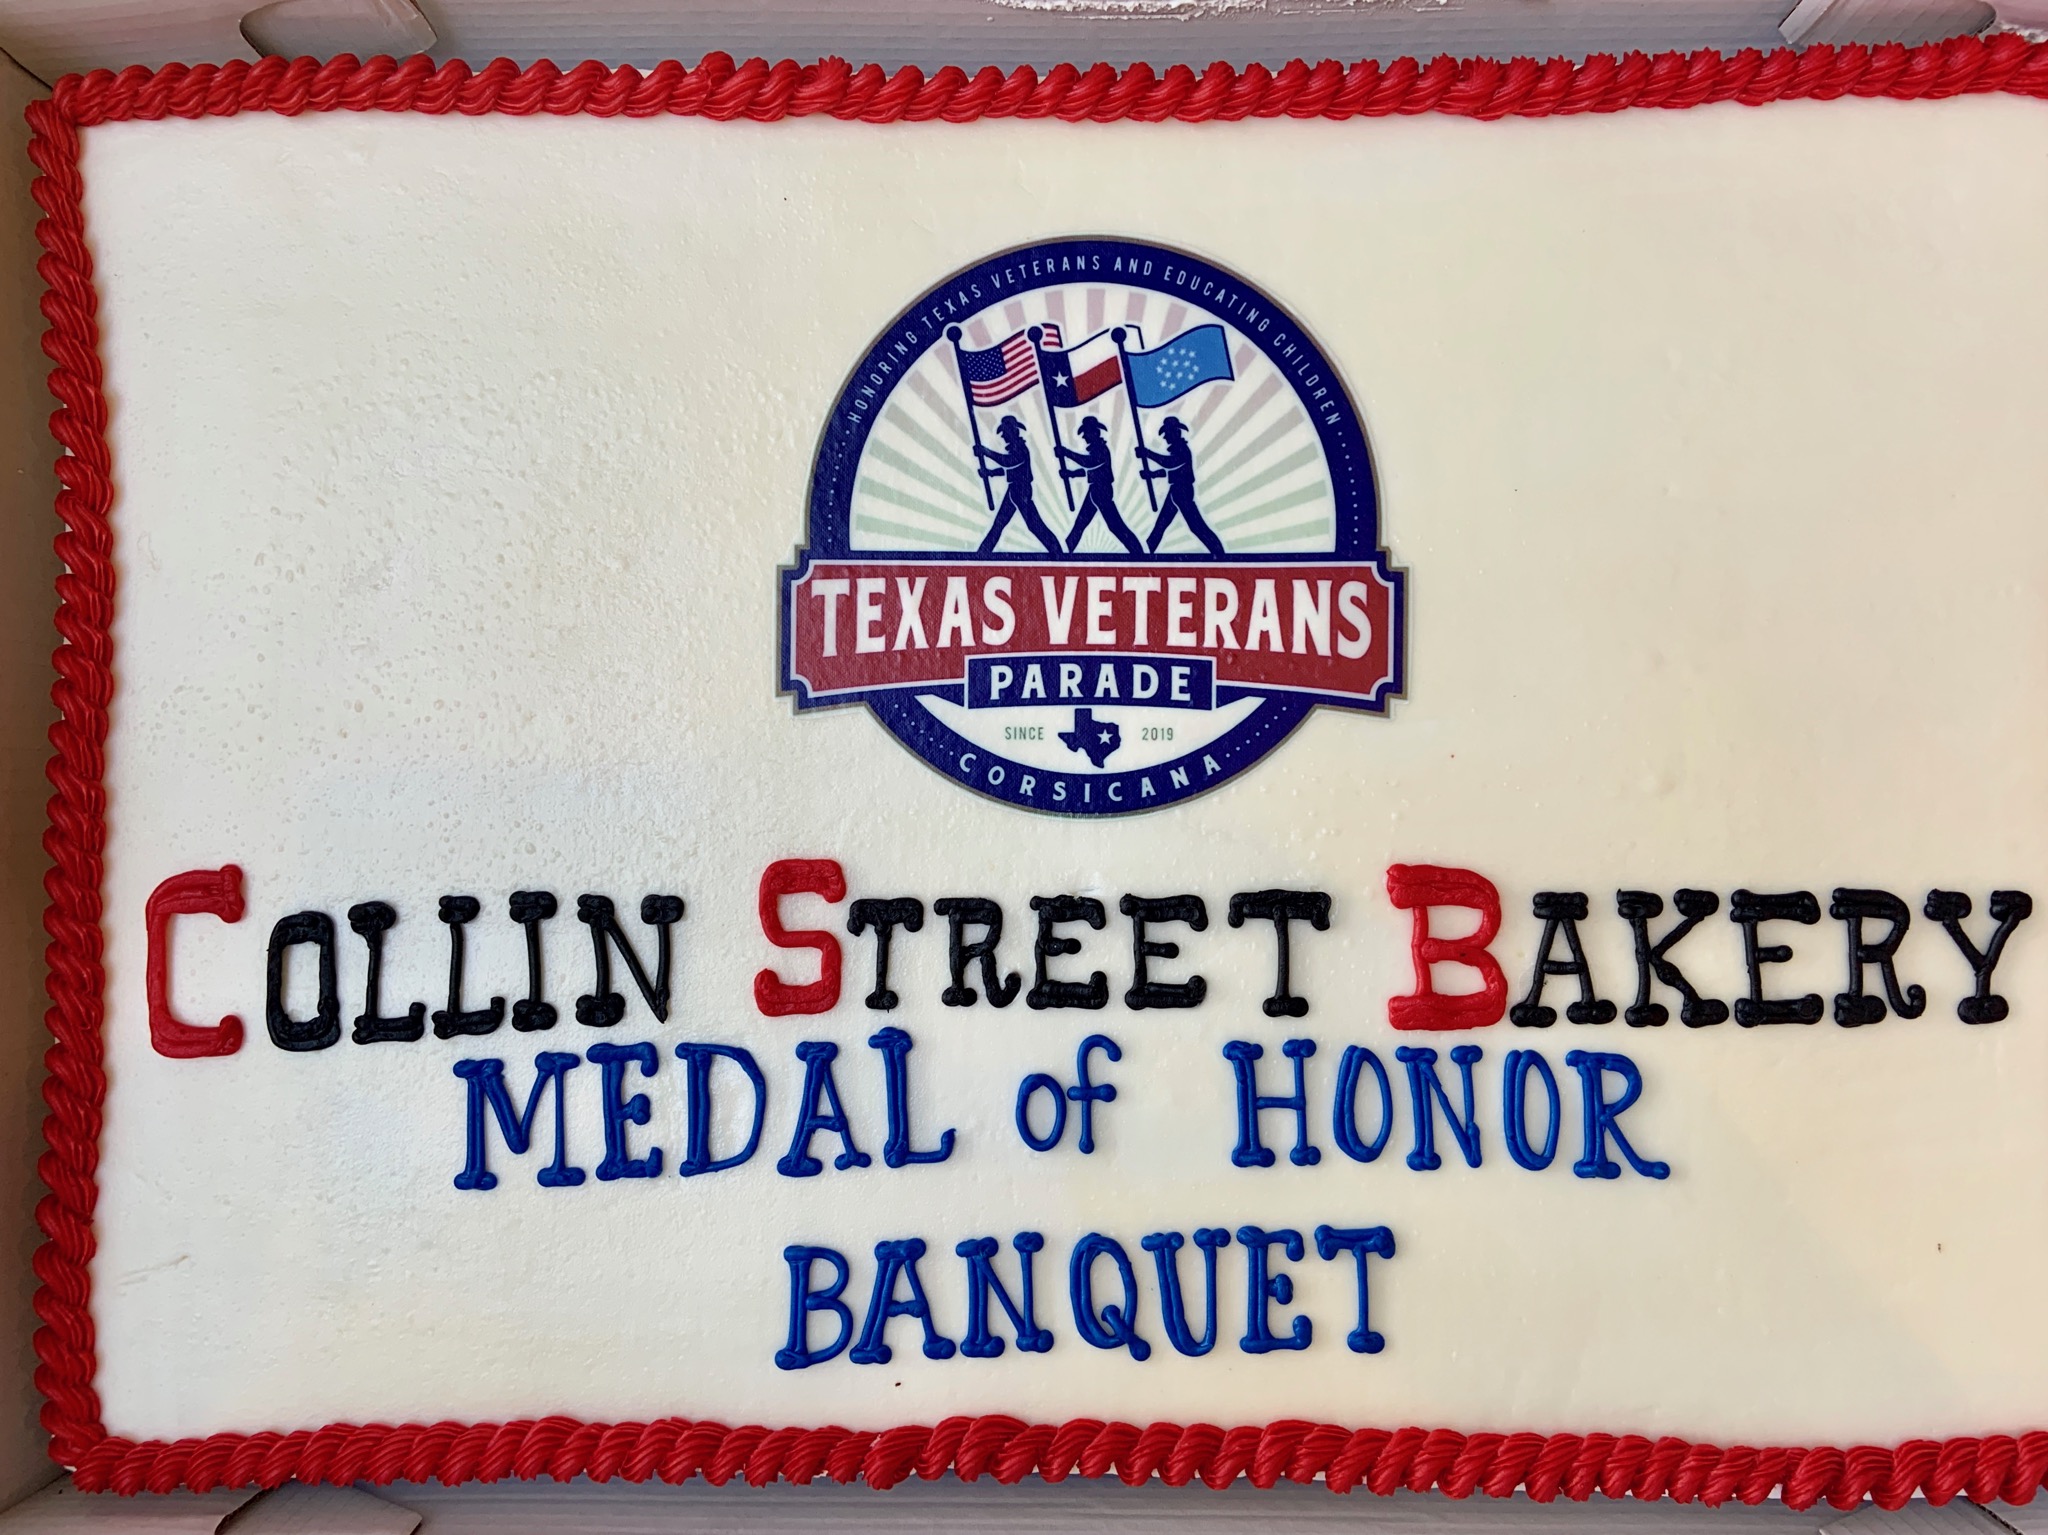 Since 1896 Collin Street Bakery has hired Veterans returning from foreign wars. Many a soldier loved the touch & taste of home that came with the delivery of a Deluxe Fruitcake to them in a war zone.